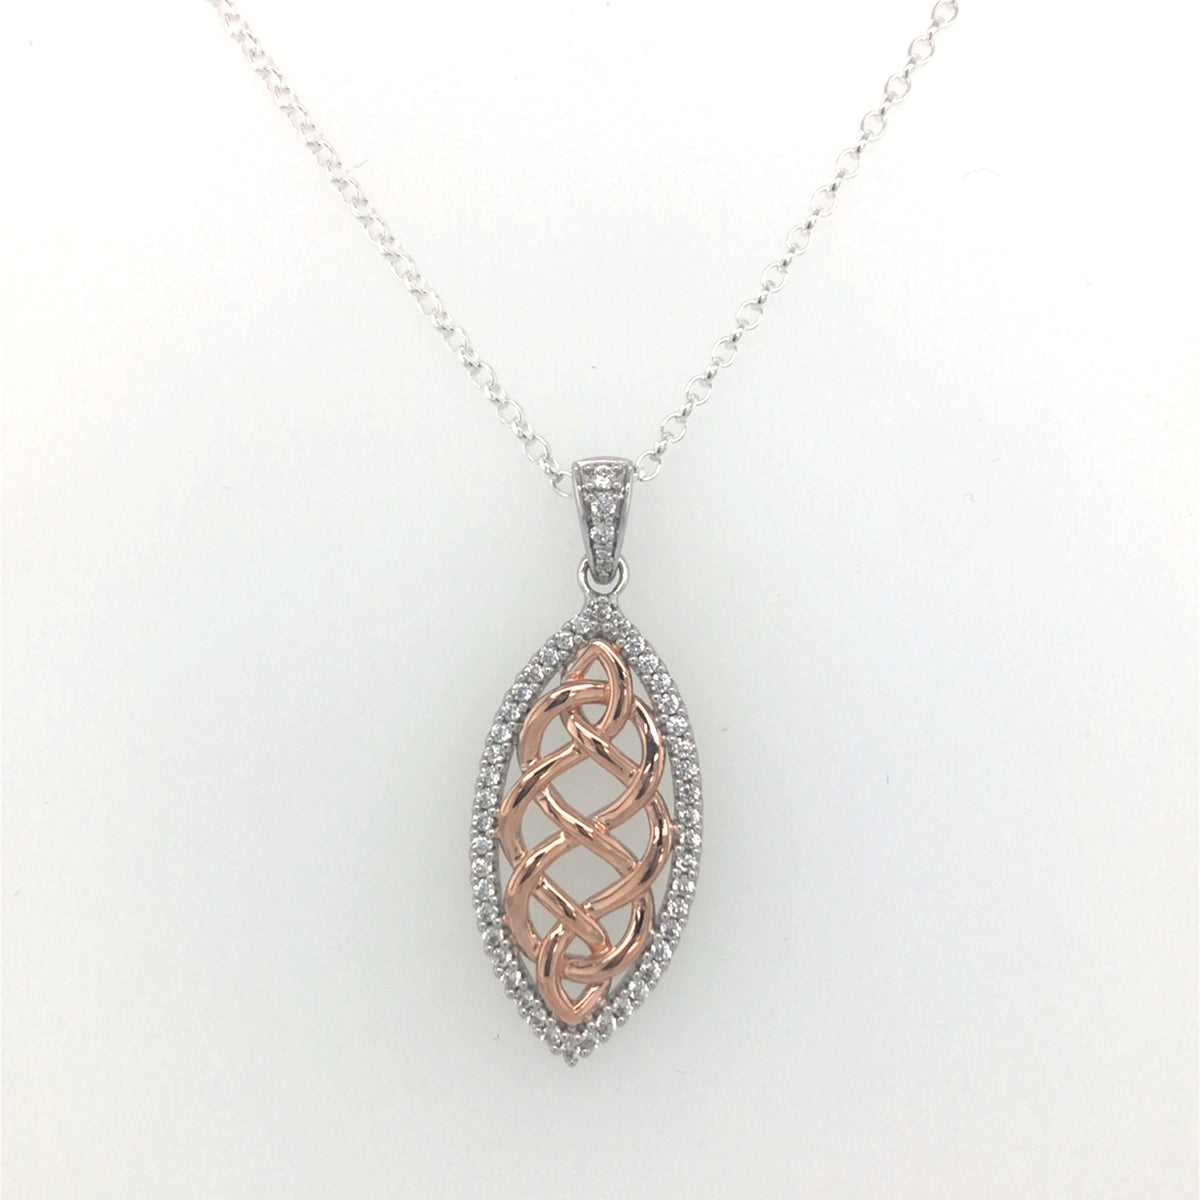 Sterling Silver Pendant with Rose Gold Celtic Deign